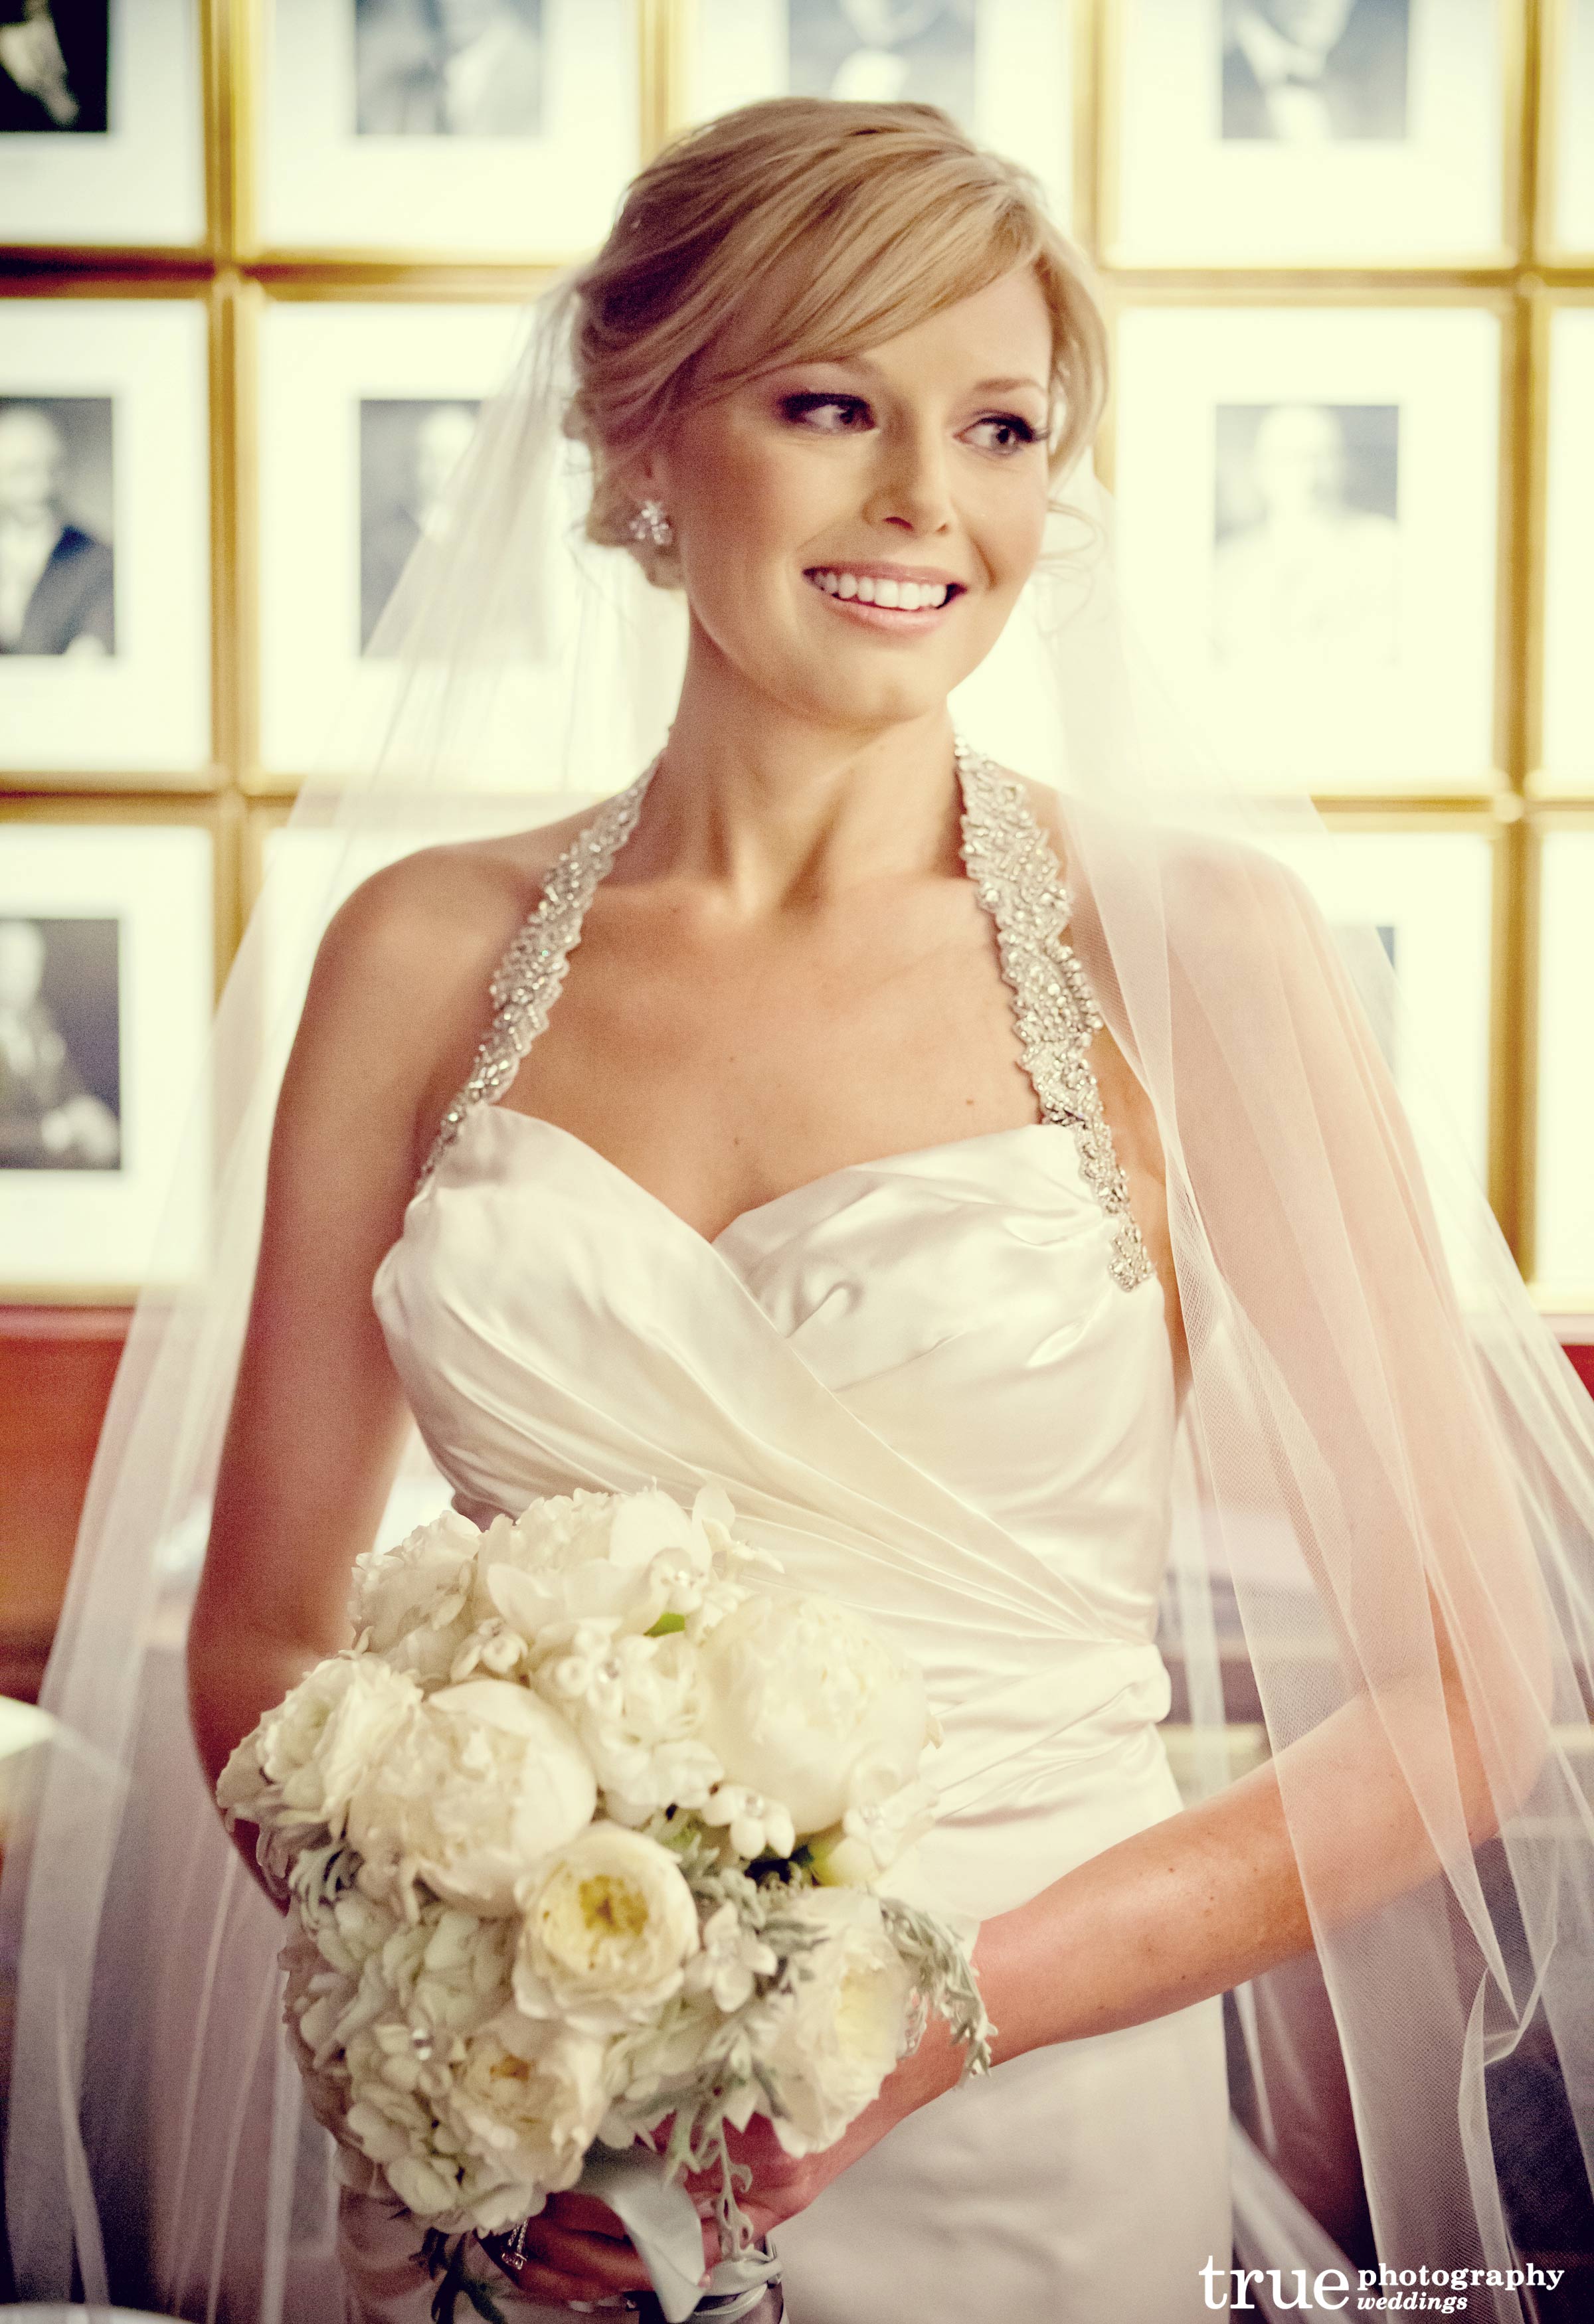 Brides by Brittany Wedding Airbrush Makeup and Hair in San Diego